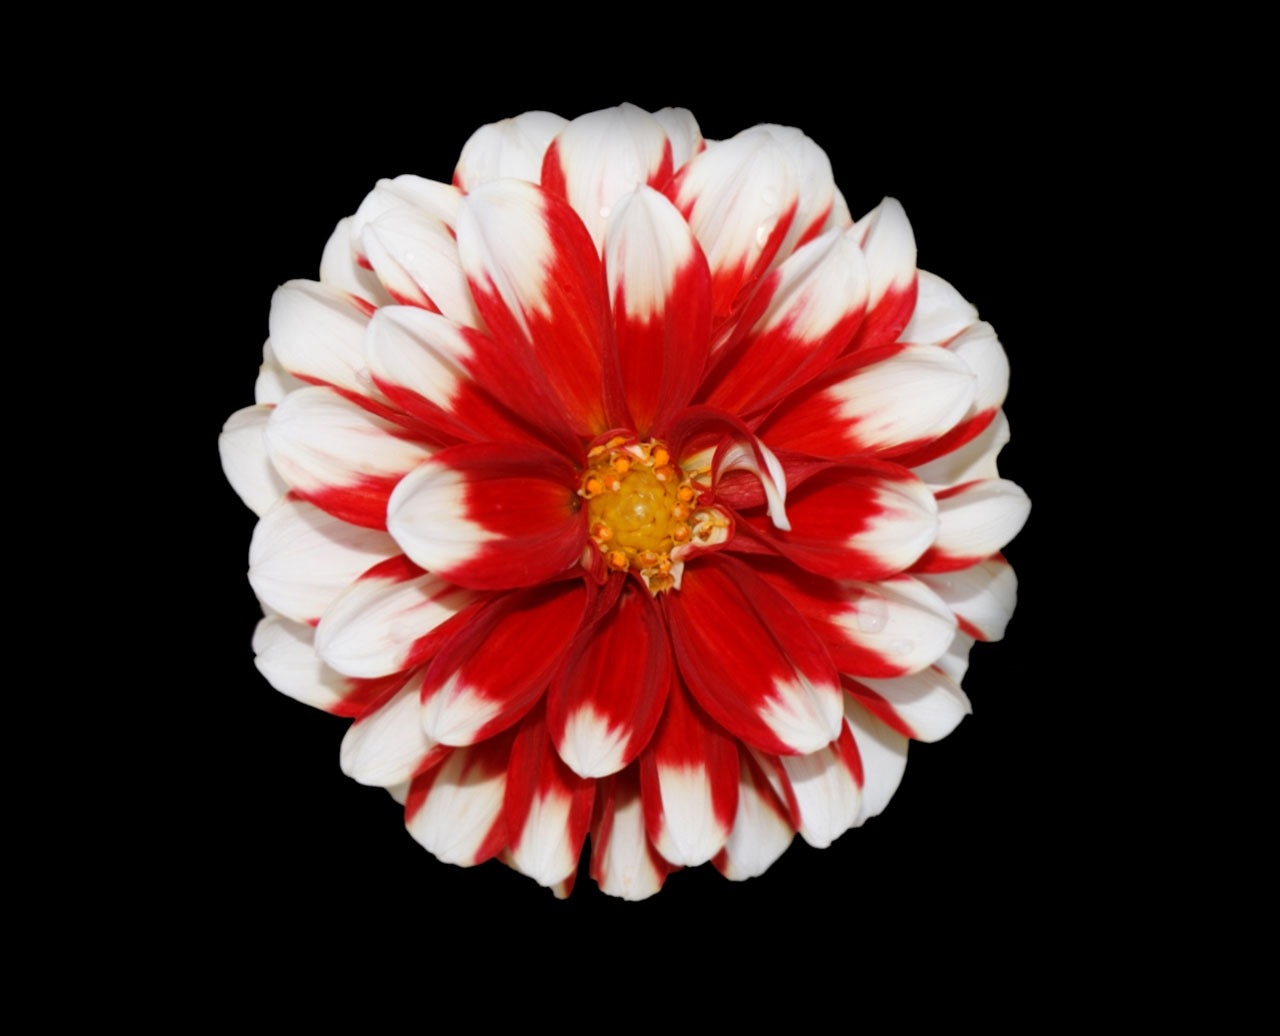 red and white clustered petal flower